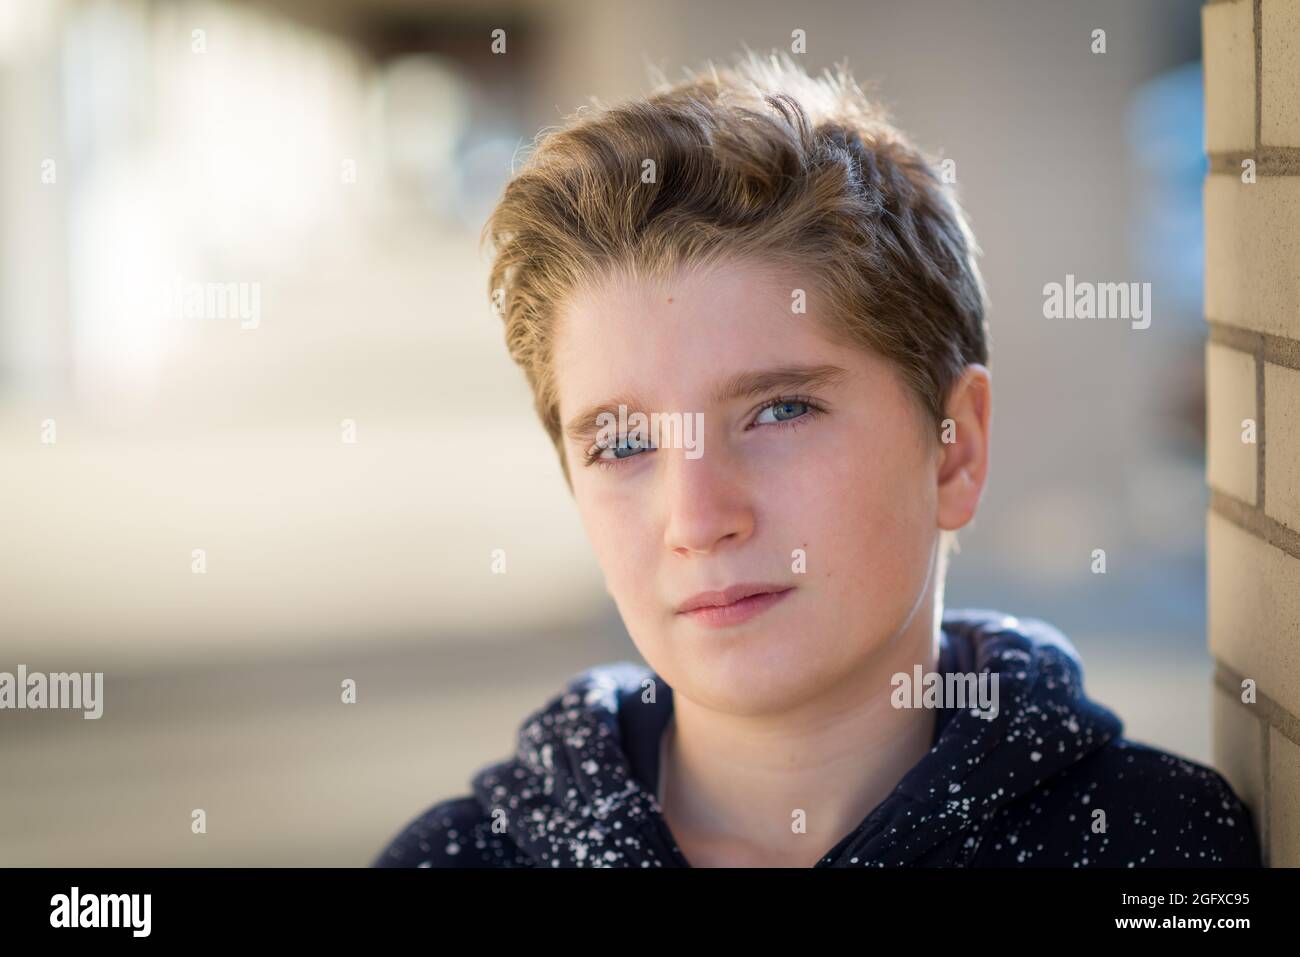 Portrait of a cute boy with blond hair Stock Photo